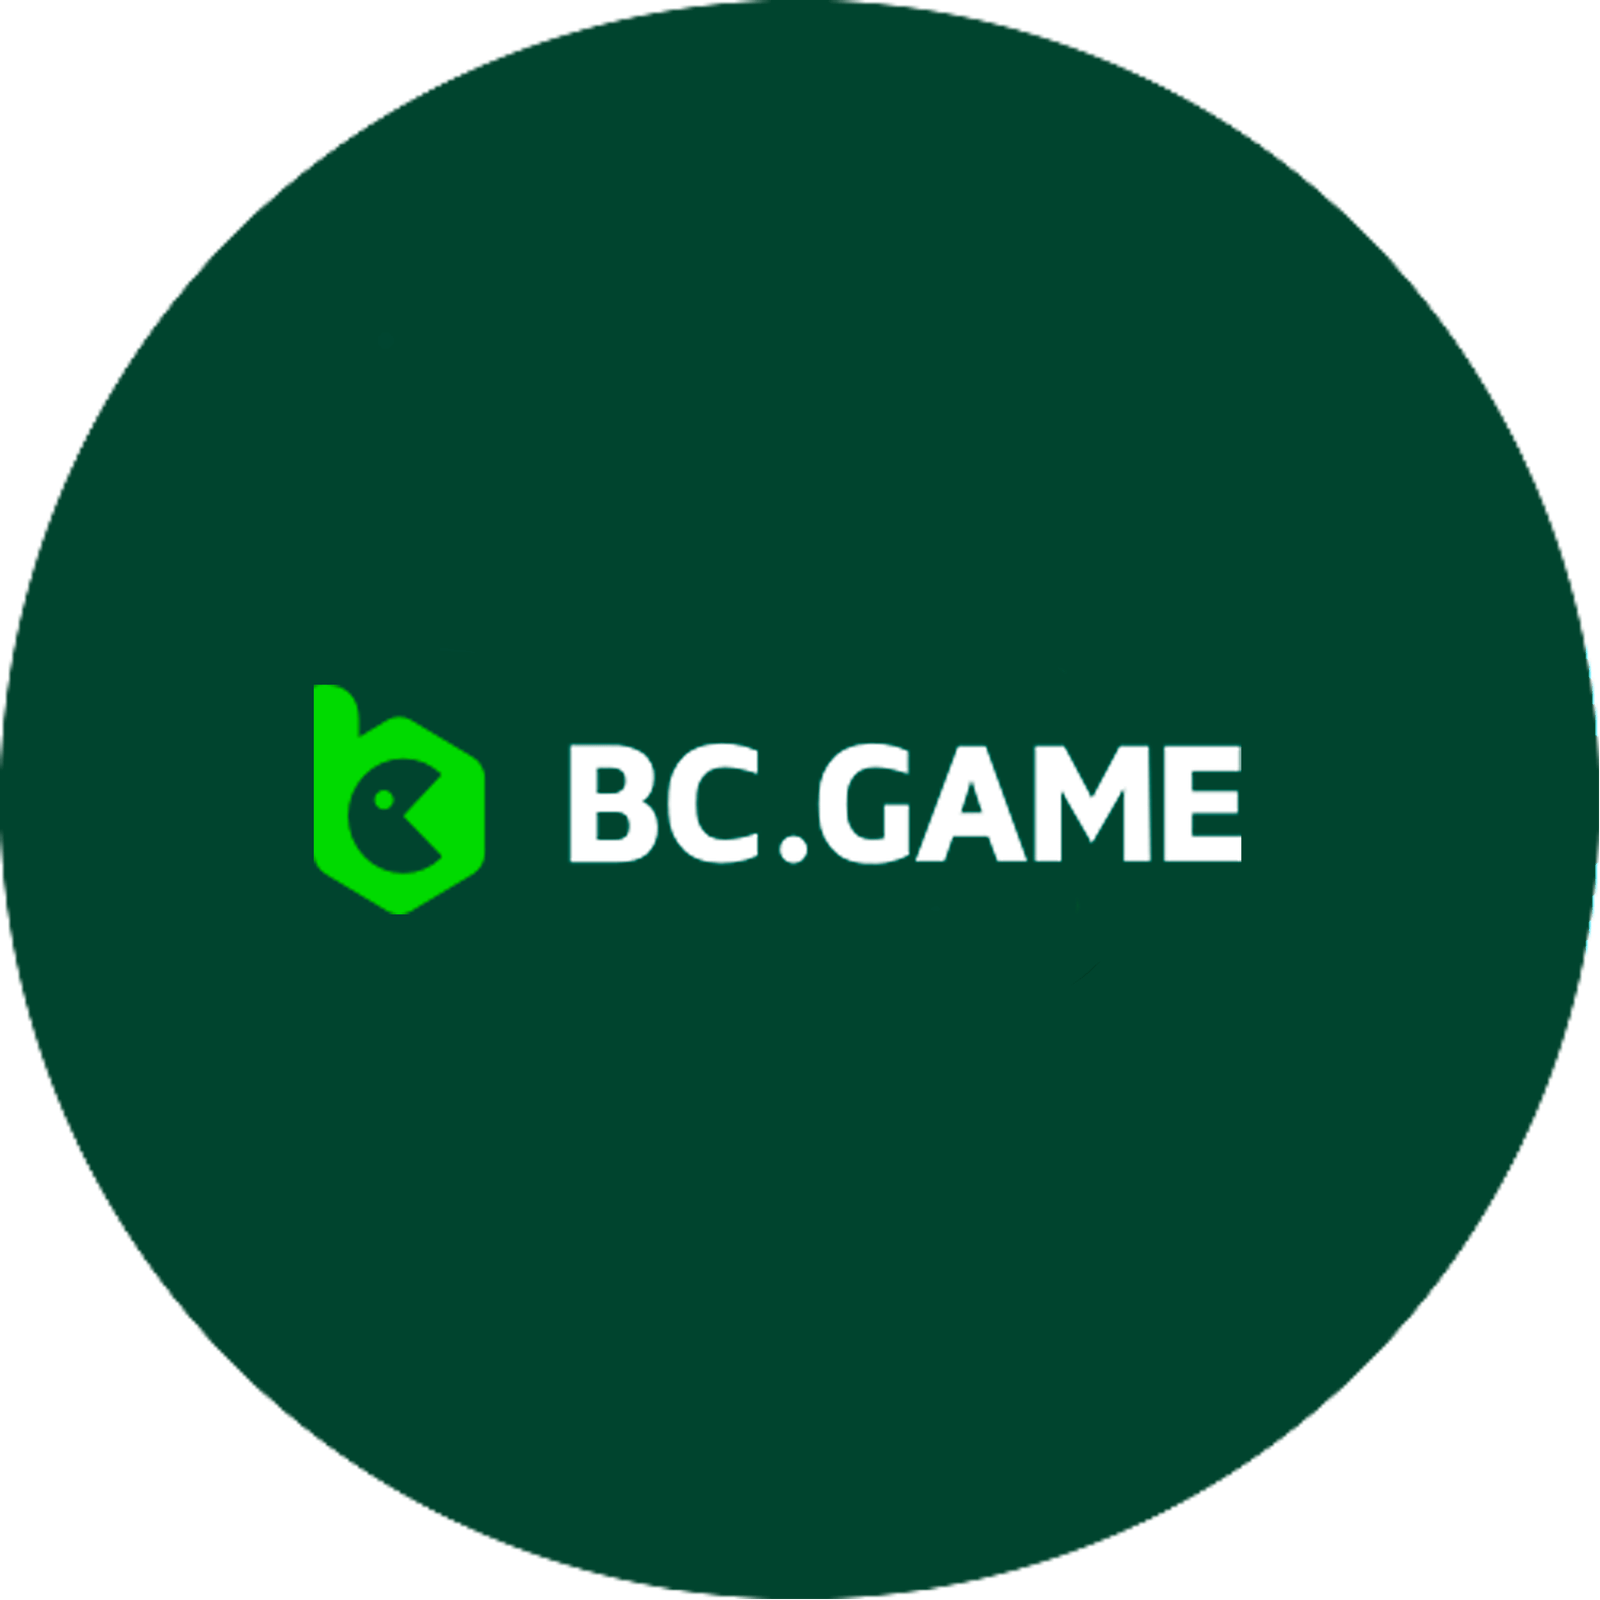 BC Game First Deposit with up to 360% Bonus!